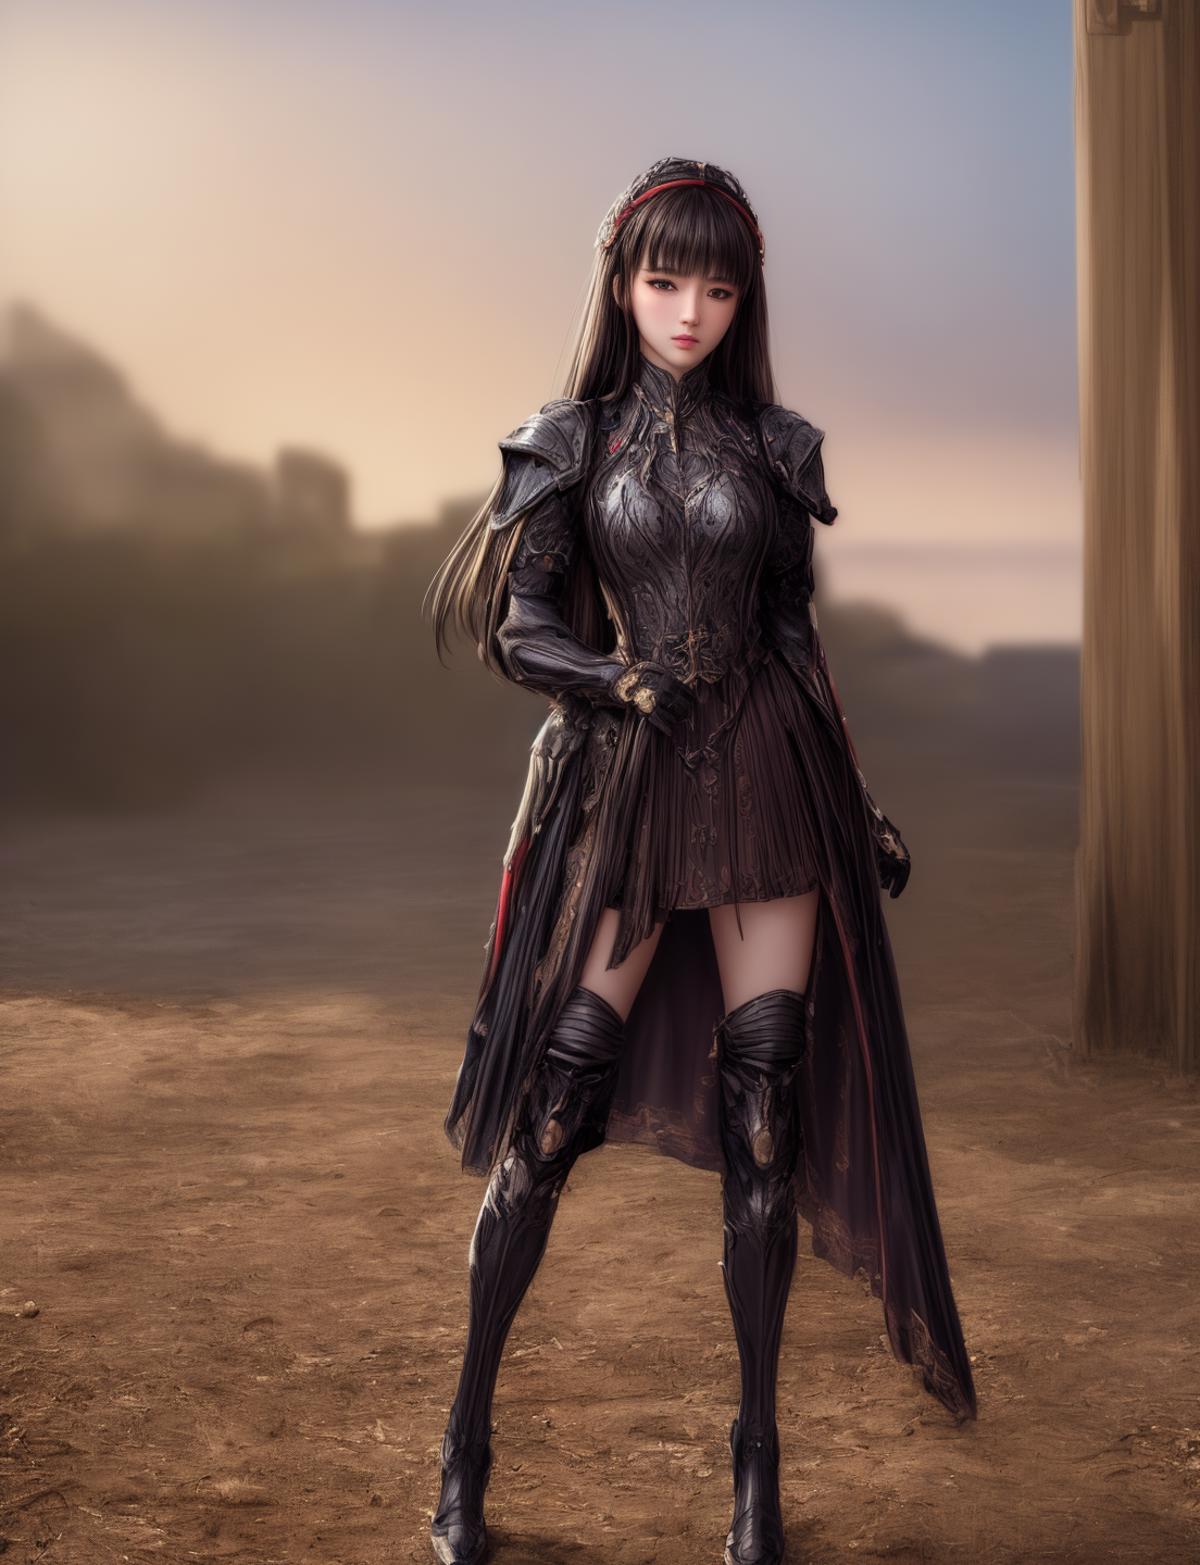 Artistic Eastern Fantasy Armor and Dress image by bluefish12